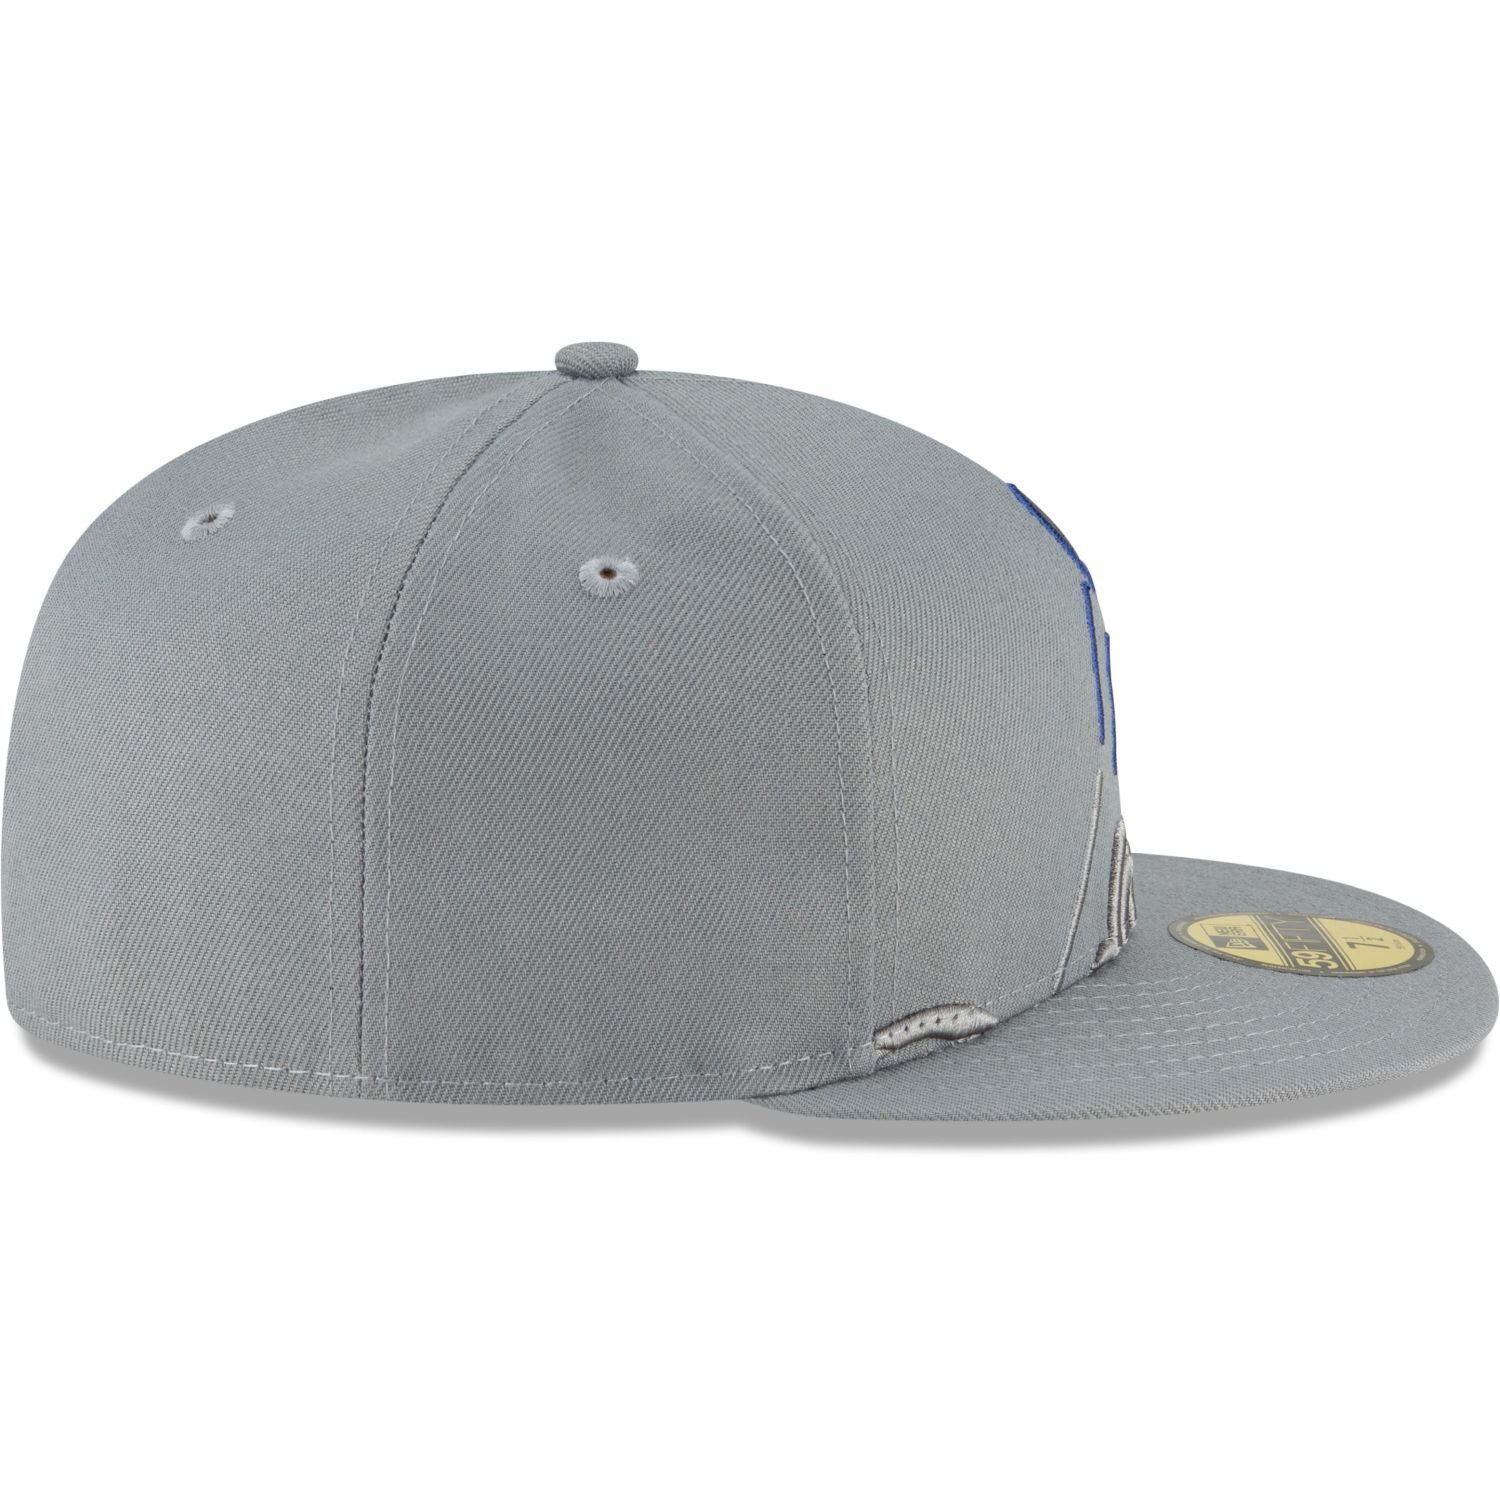 Dodgers STORM Fitted Team 59Fifty GREY Los Cooperstown Cap Angeles MLB New Era